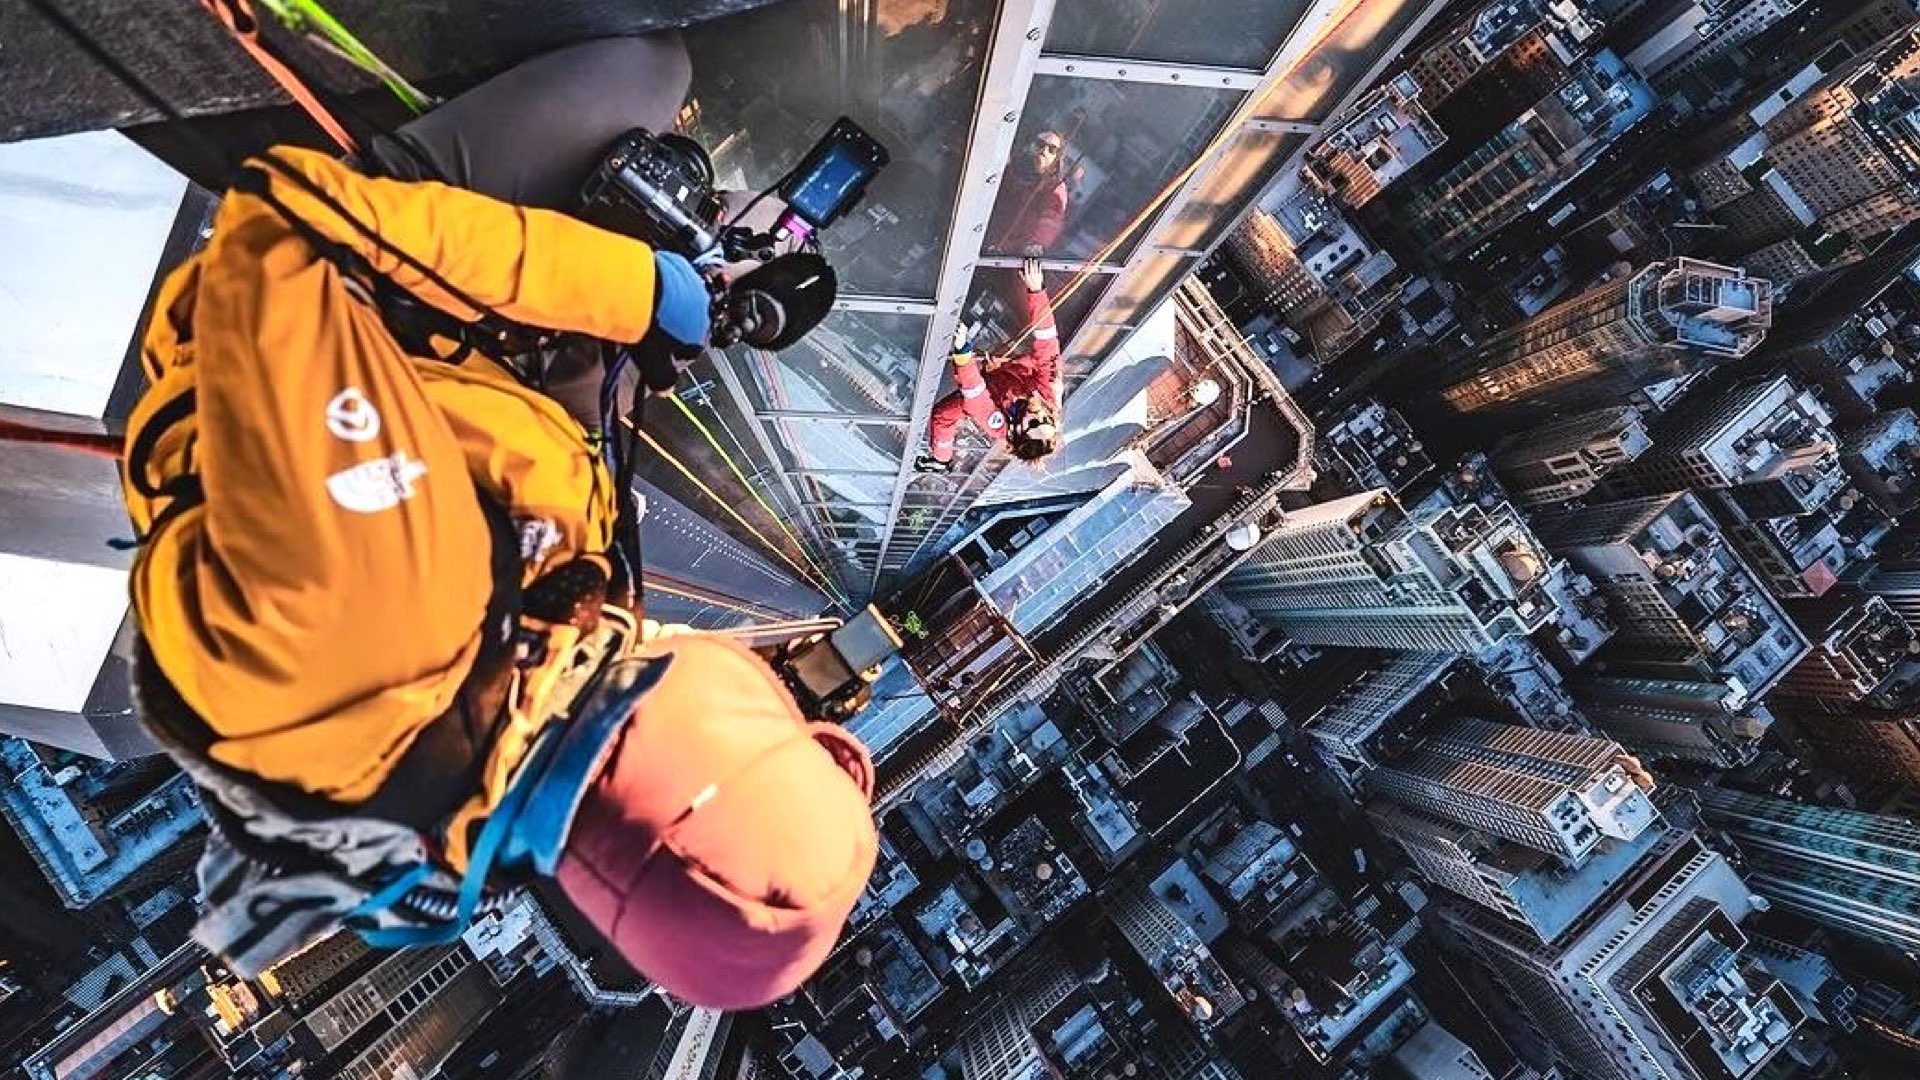 Renan Ozturk with the Sony BURANO at the top of the Empire State Building. Picture: Renan Ozturk